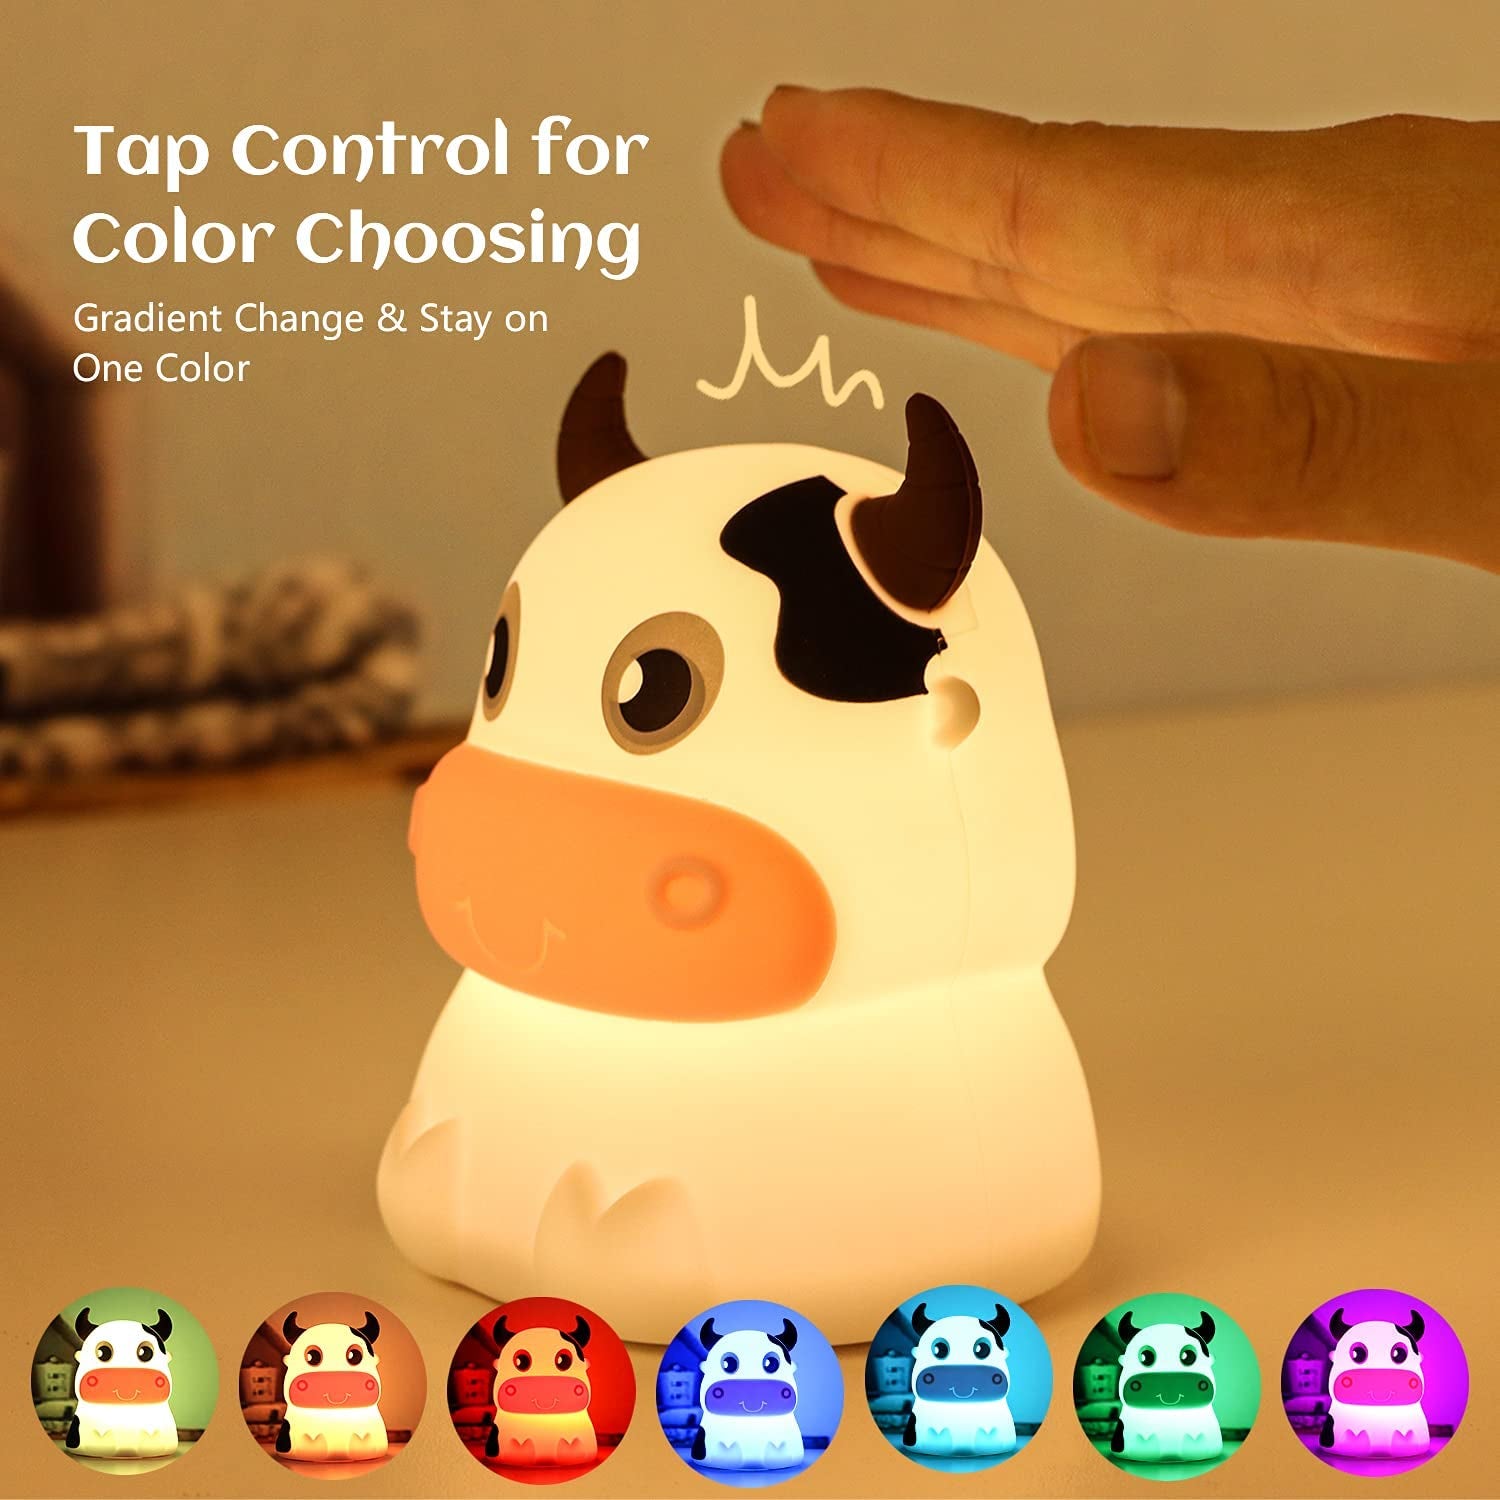 Night Light for Kids, Portable Tap Control Nightlight Lamp, 7 Colors Mode, Silicone Cute Animal Cow LED Nursery Night Lamp Bedroom Decor for Baby Infant or Toddler (Cows-Battery Powered)